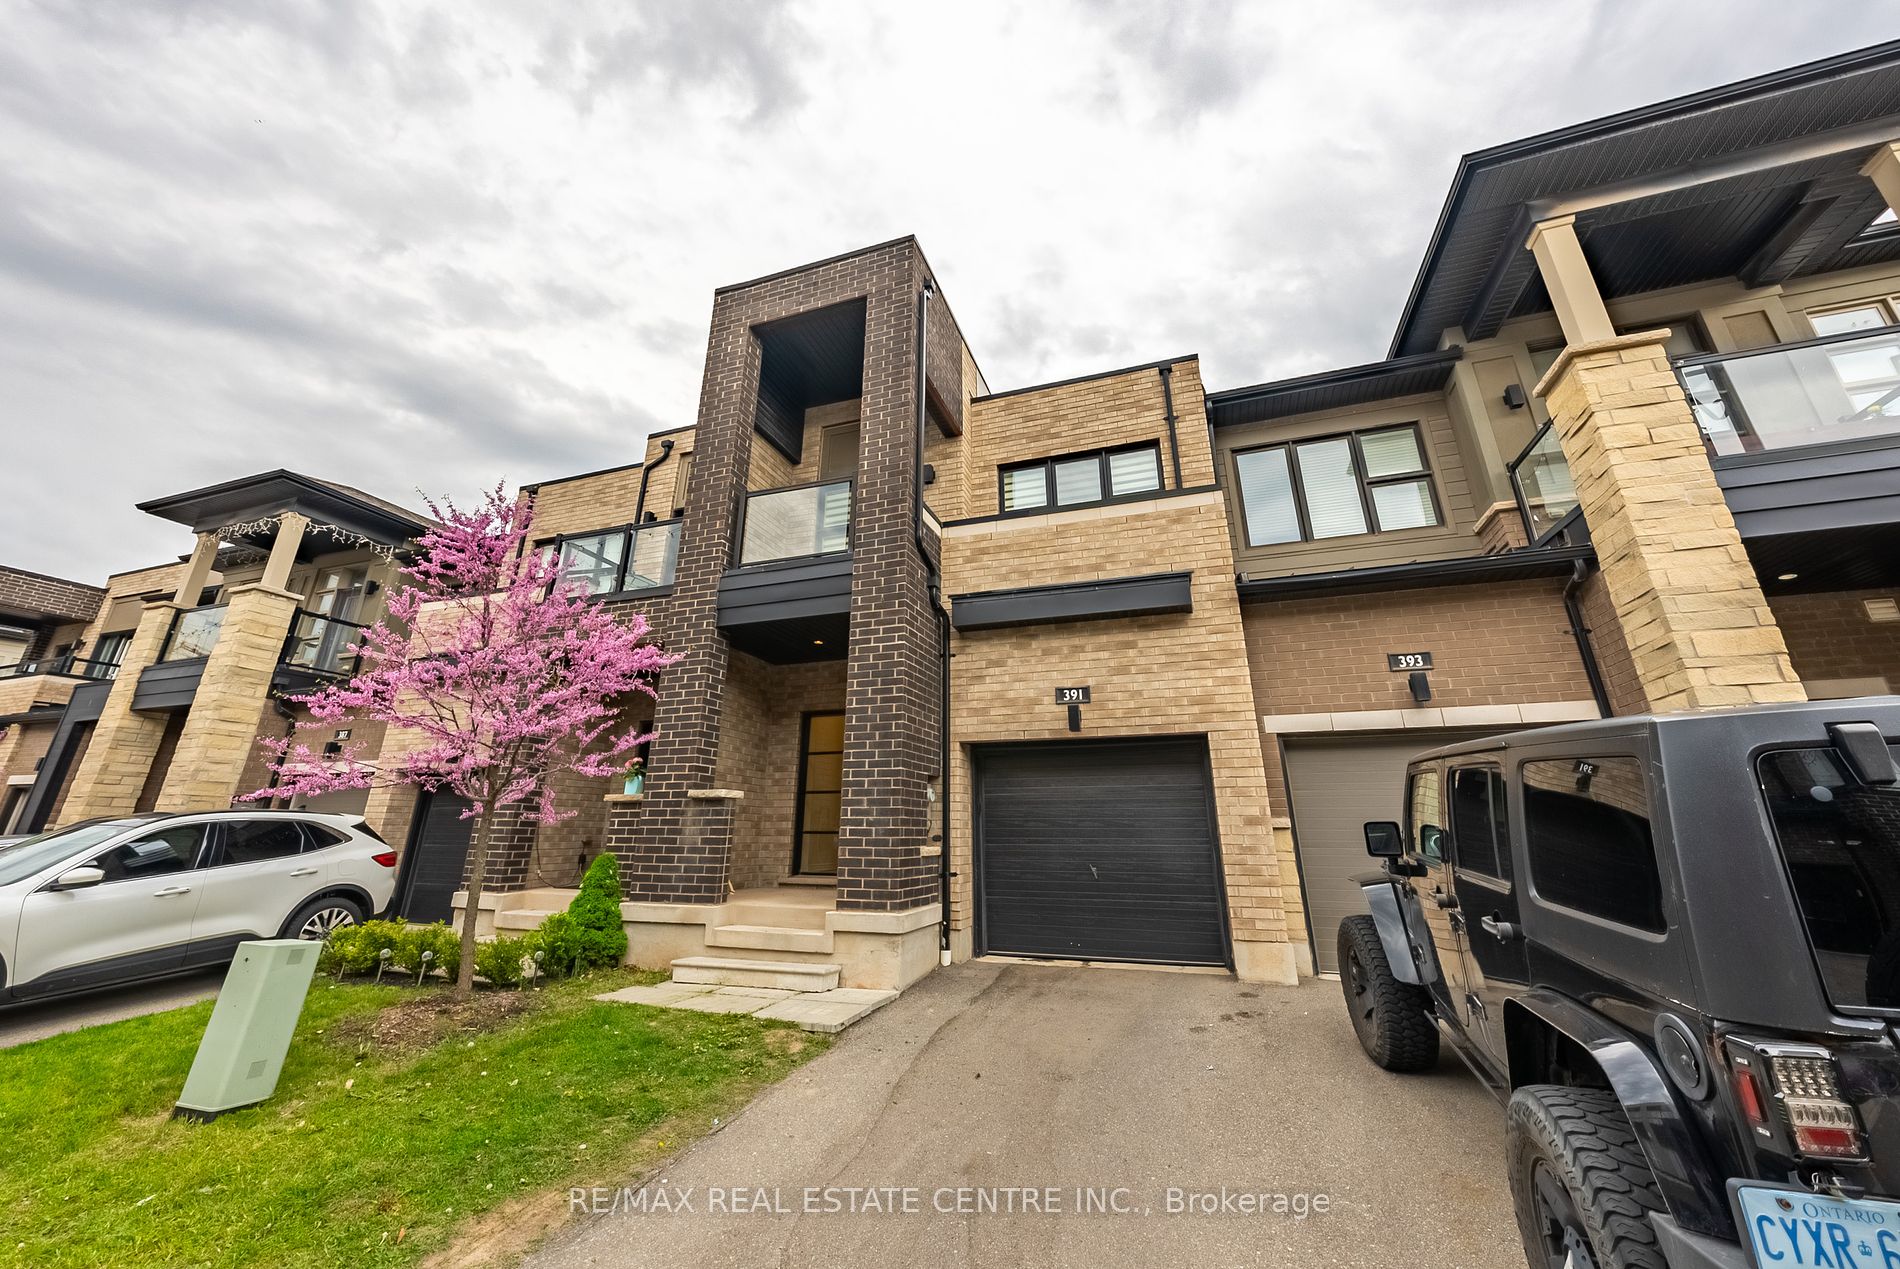 Att/Row/Twnhouse house for sale at 391 Athabasca Common Oakville Ontario